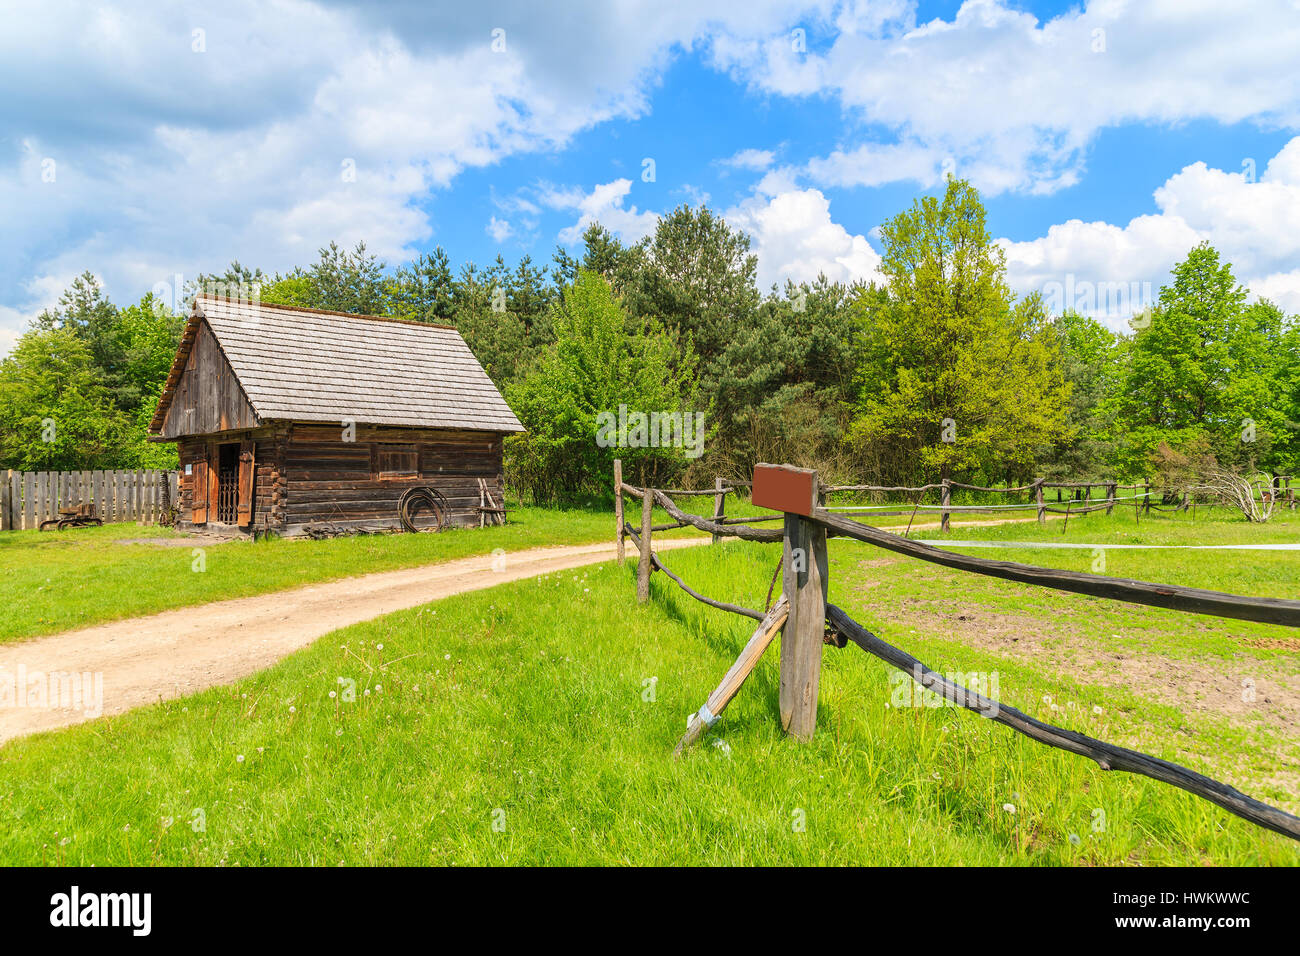 Rural road and wooden pasture fence in Tokarnia village on sunny spring day, Poland Stock Photo